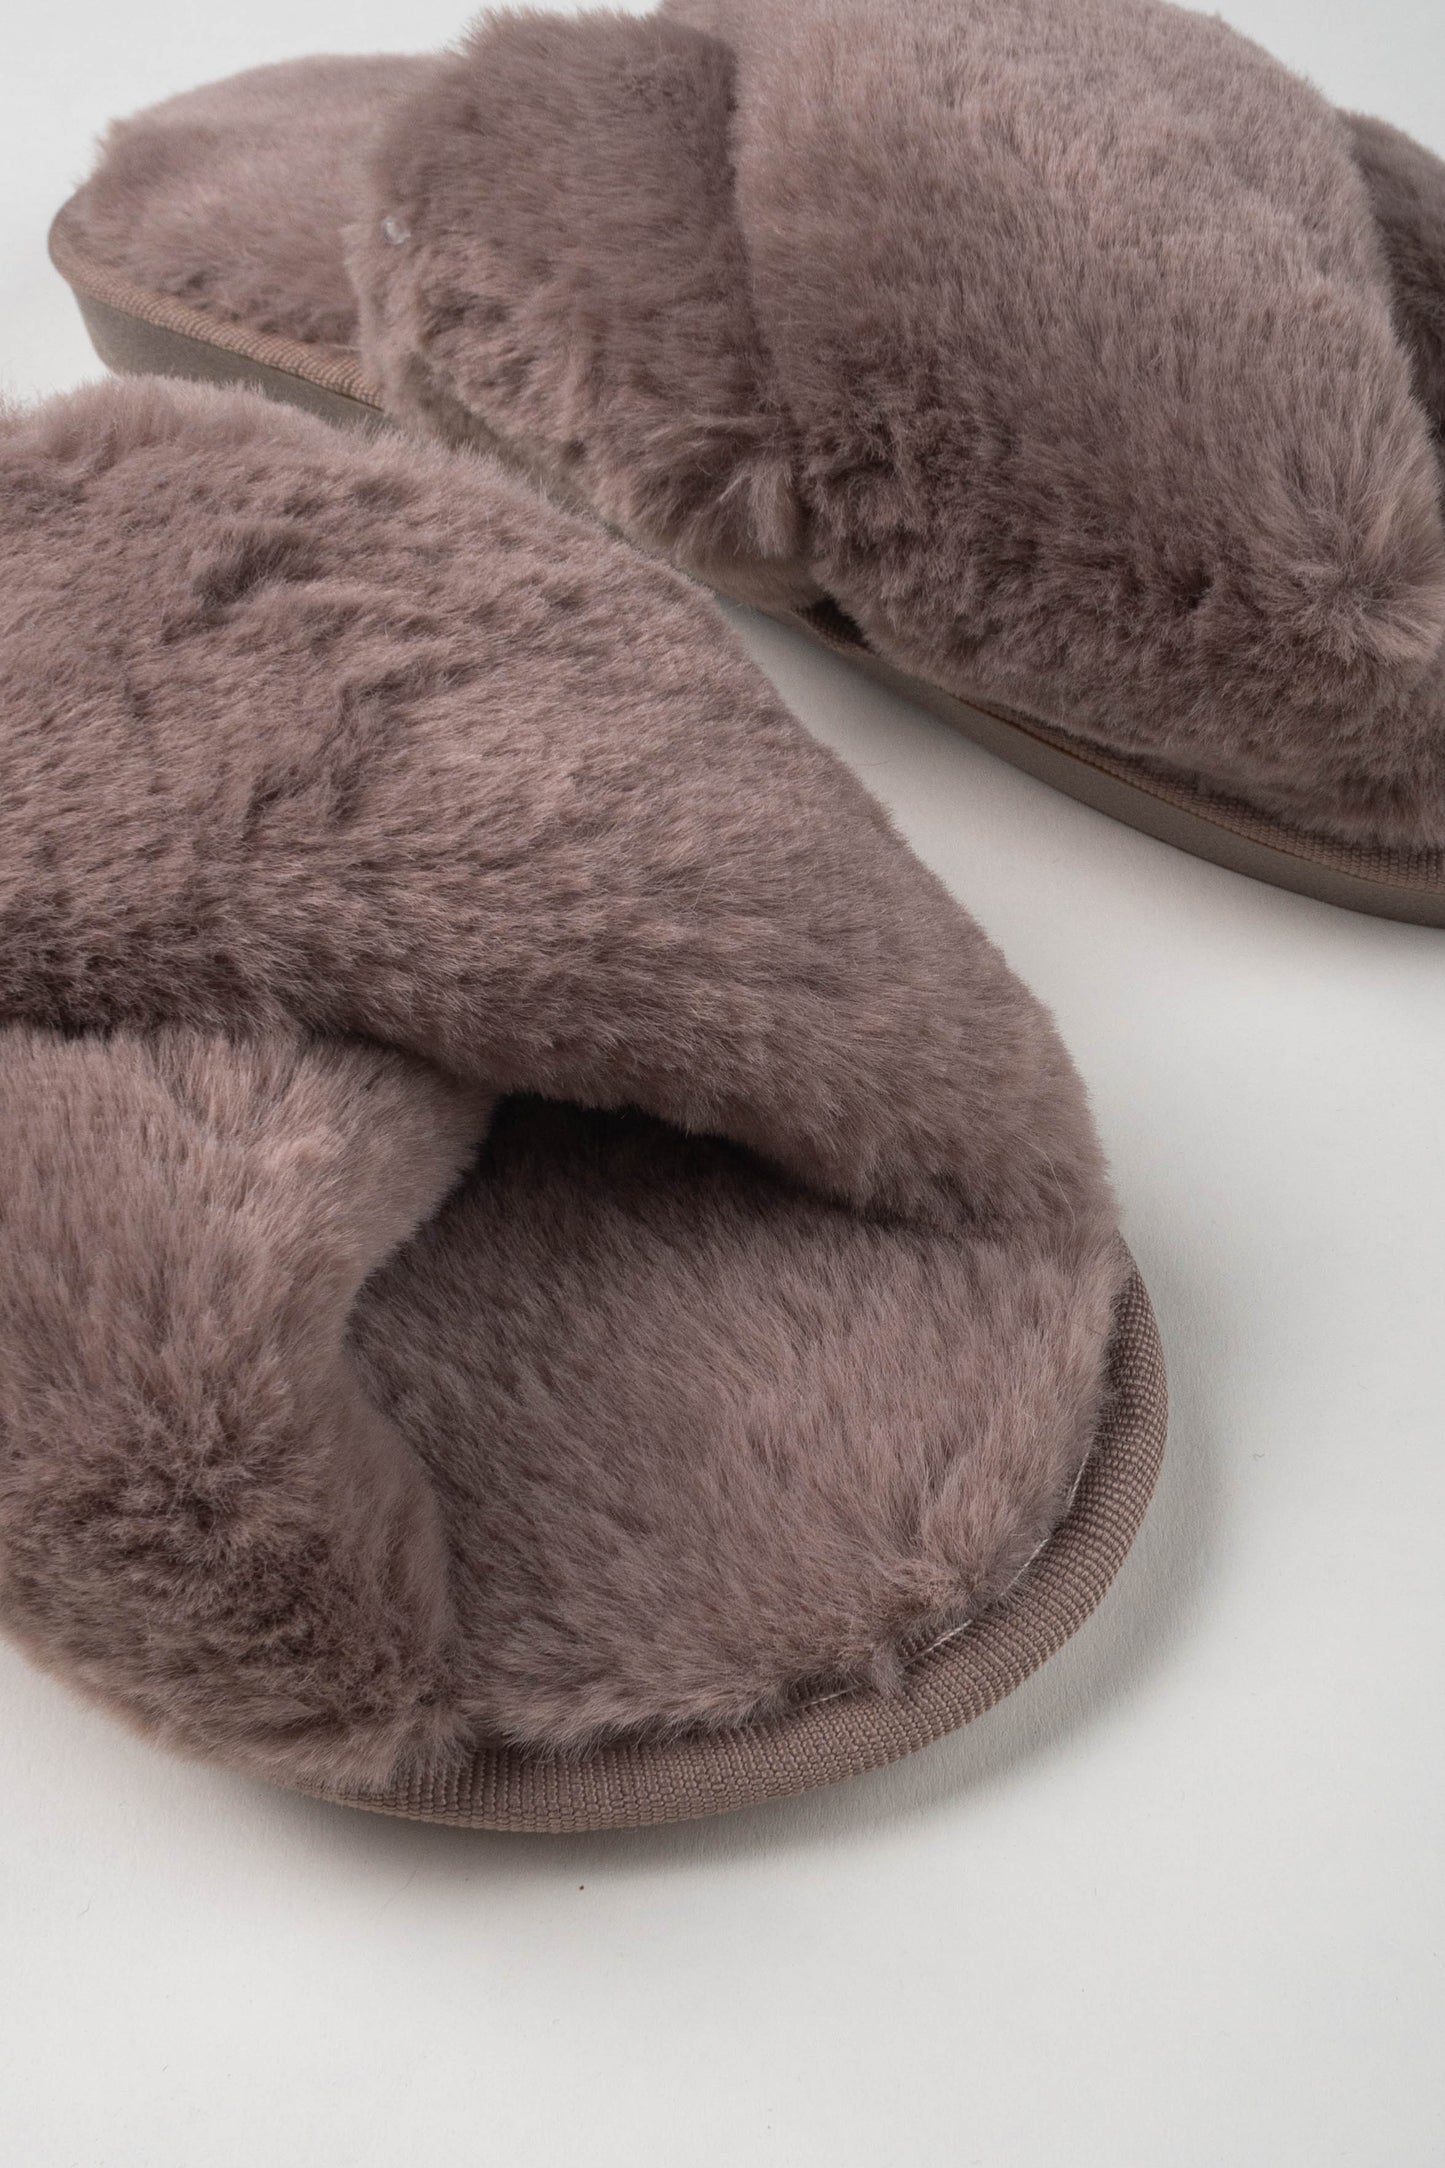 Americandreams Lou Faux fur slippers - taupe